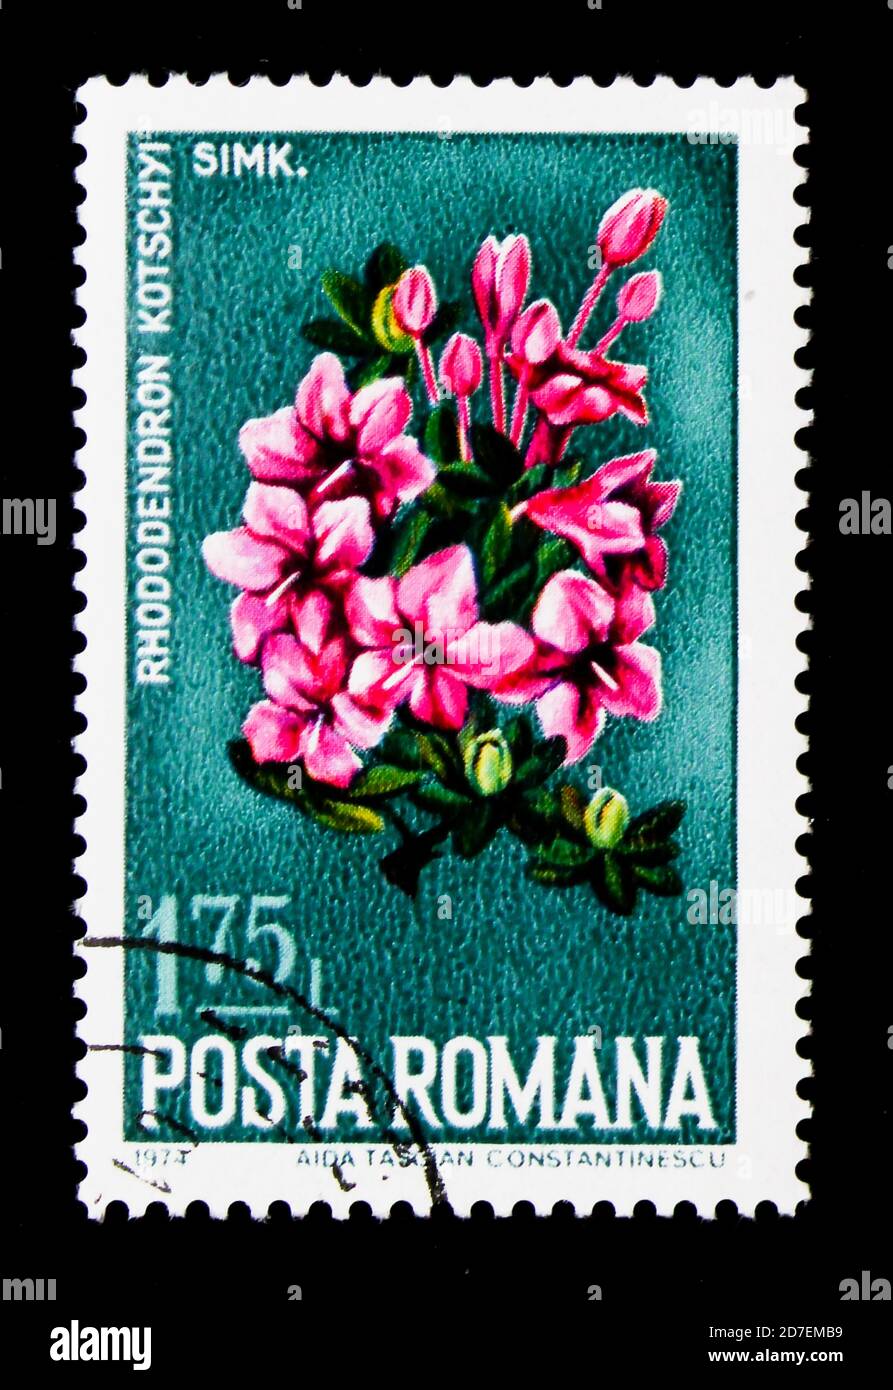 MOSCOW, RUSSIA - MARCH 29, 2018: A stamp printed in Romania shows Azalea (Rhododendron kotschyi), Nature Conservation - Wild Flowers serie, circa 1974 Stock Photo